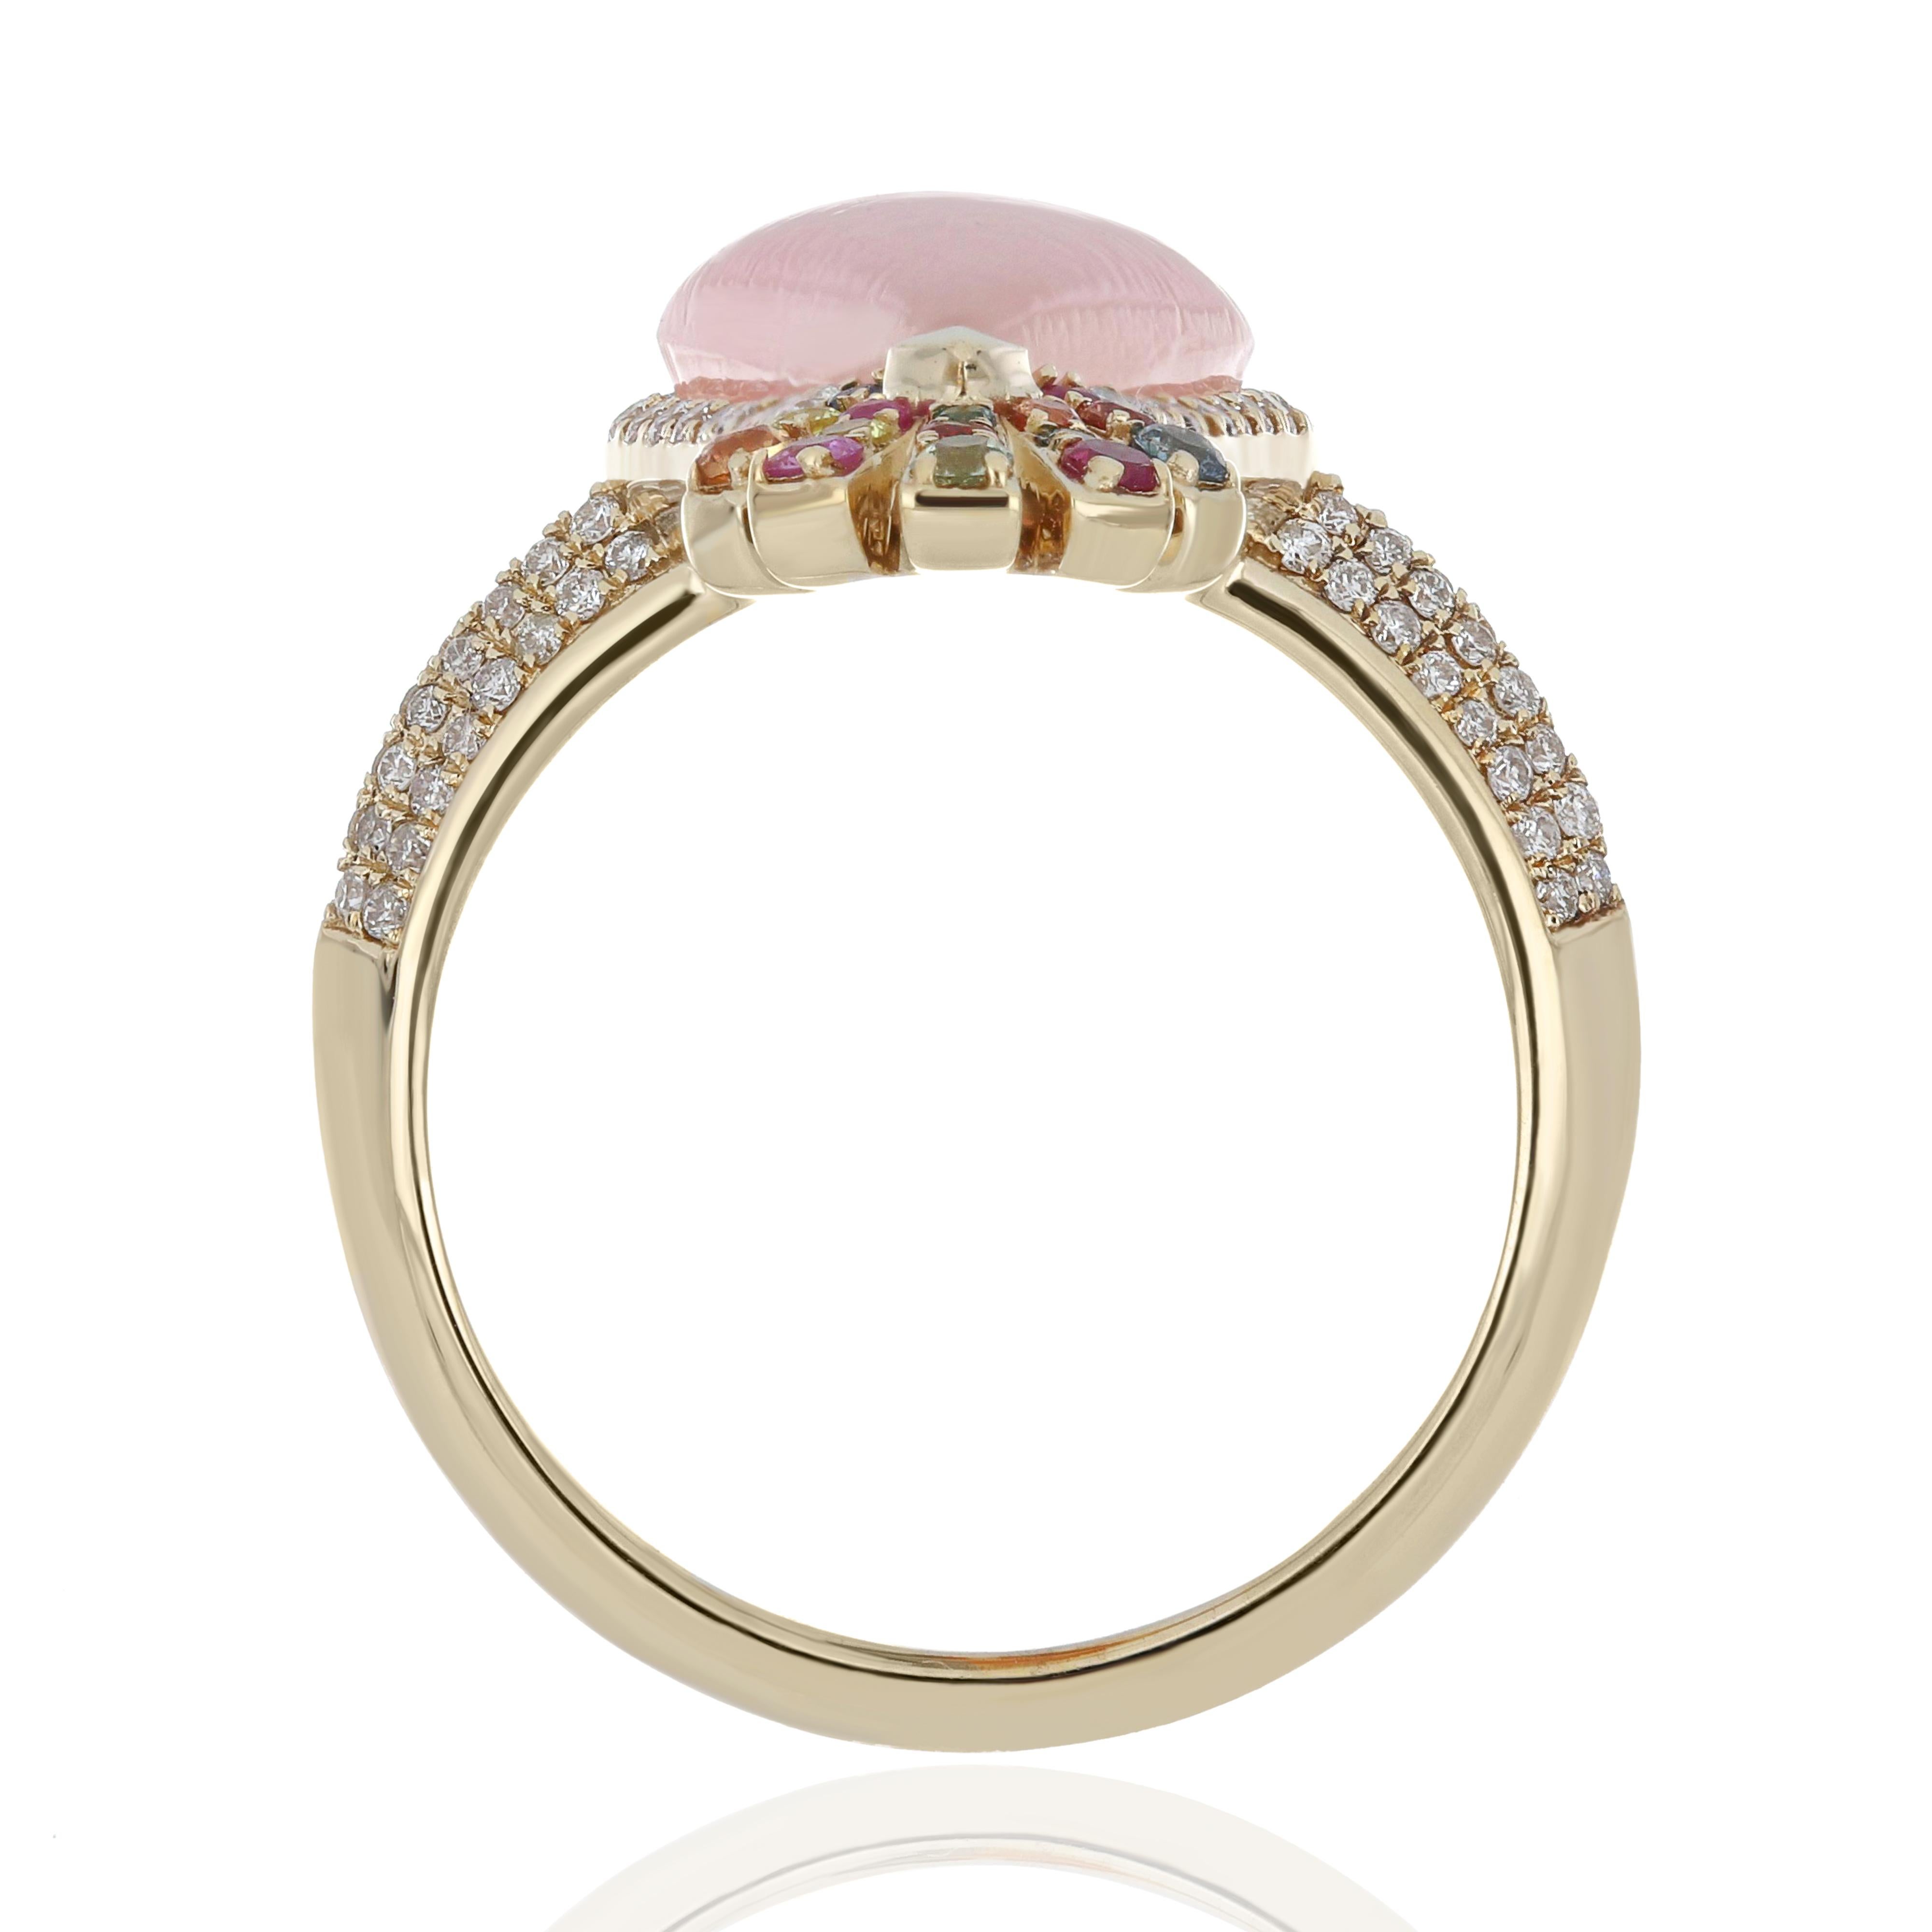 For Sale:  Pink Opal, Multi Color Sapphire and Diamond Studded Ring 14 Karat Yellow Gold 5